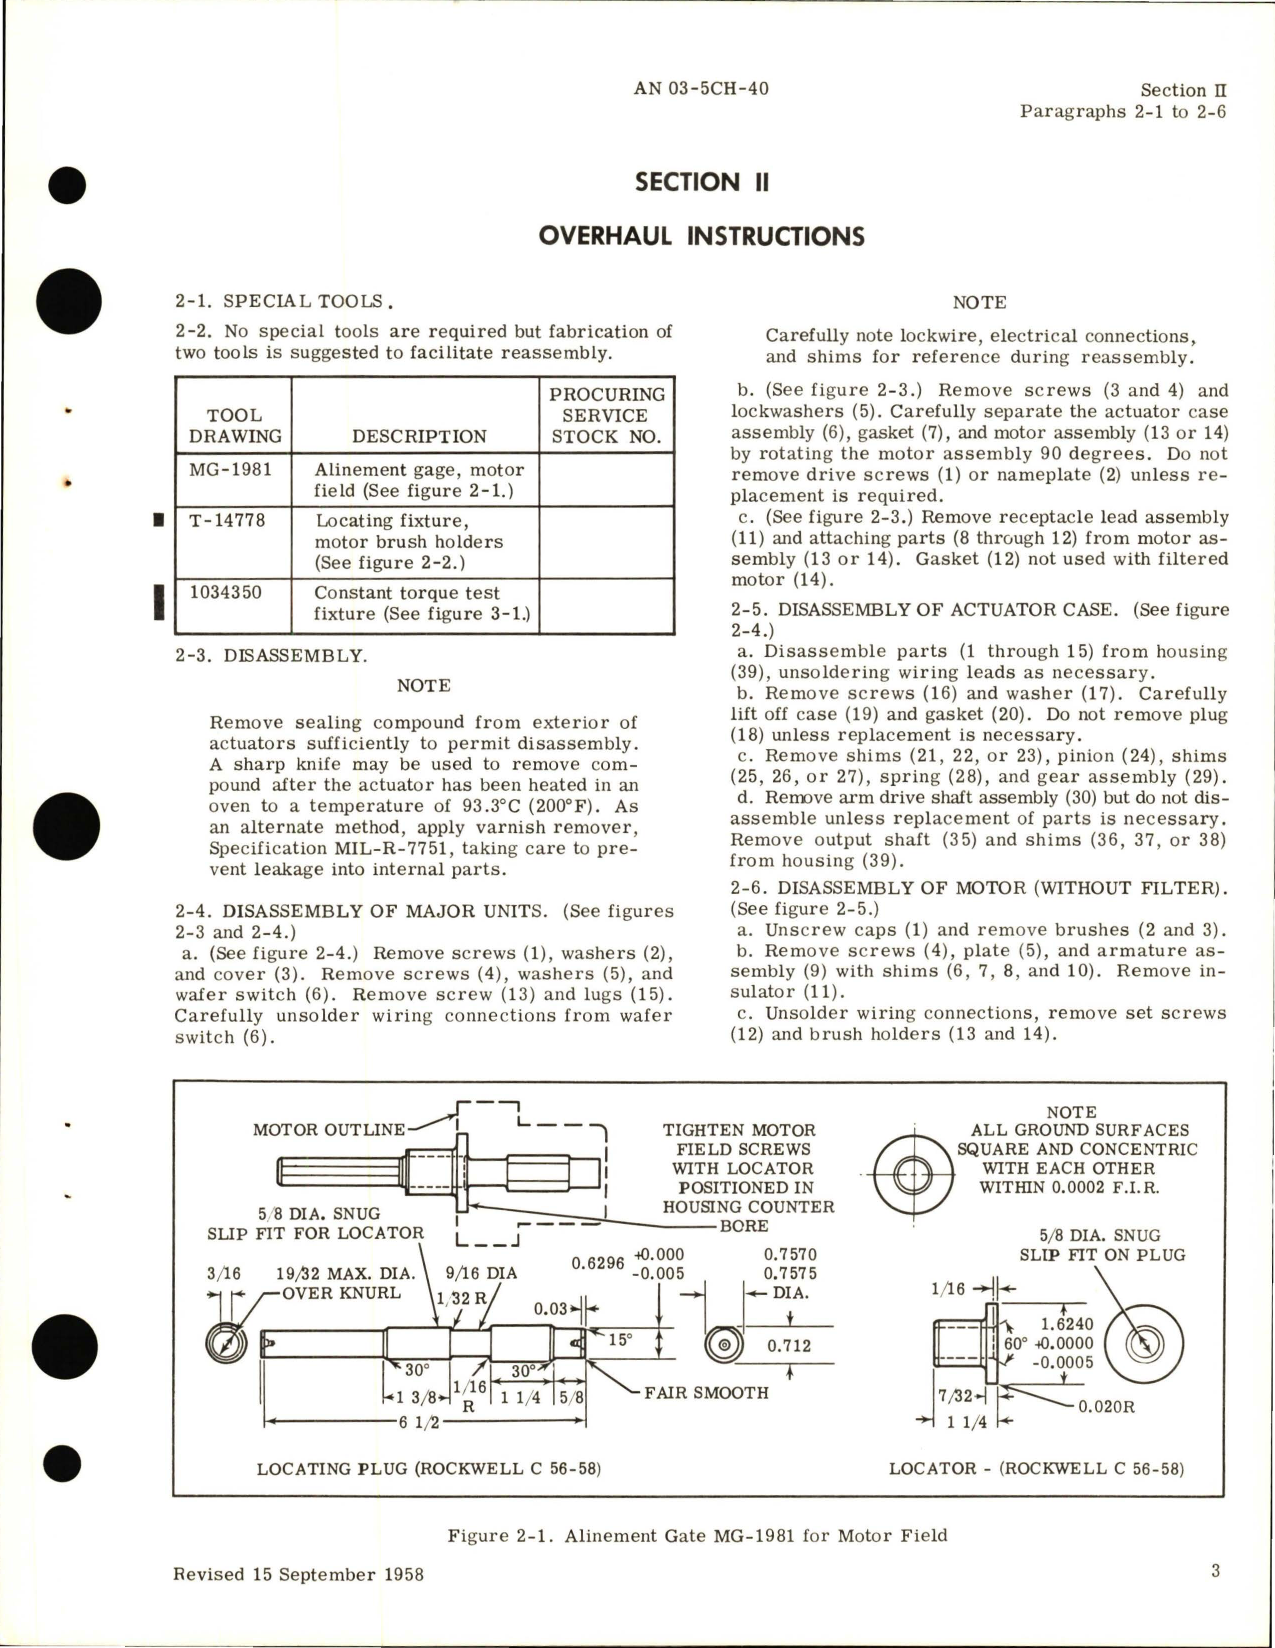 Sample page 5 from AirCorps Library document: Overhaul Instructions for Geneva-Loc Actuators - Series 108 